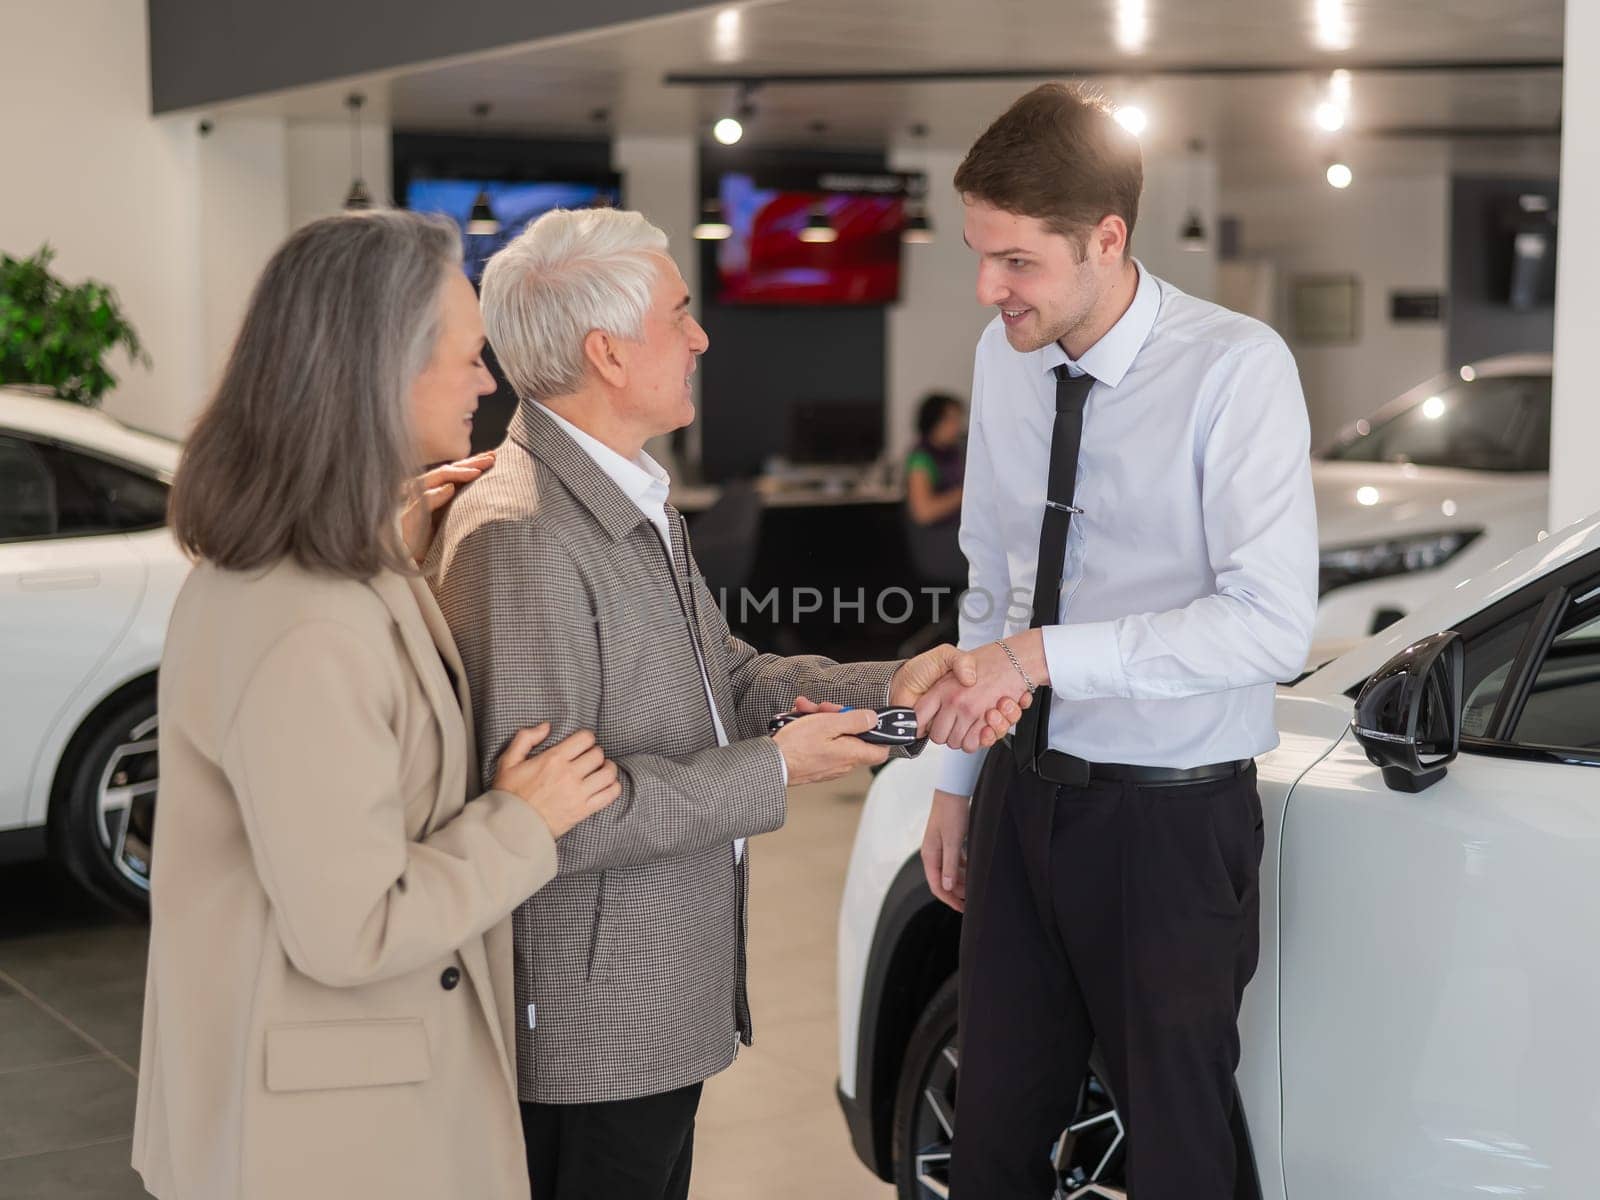 A salesman hands over the keys to a new car to an elderly Caucasian couple